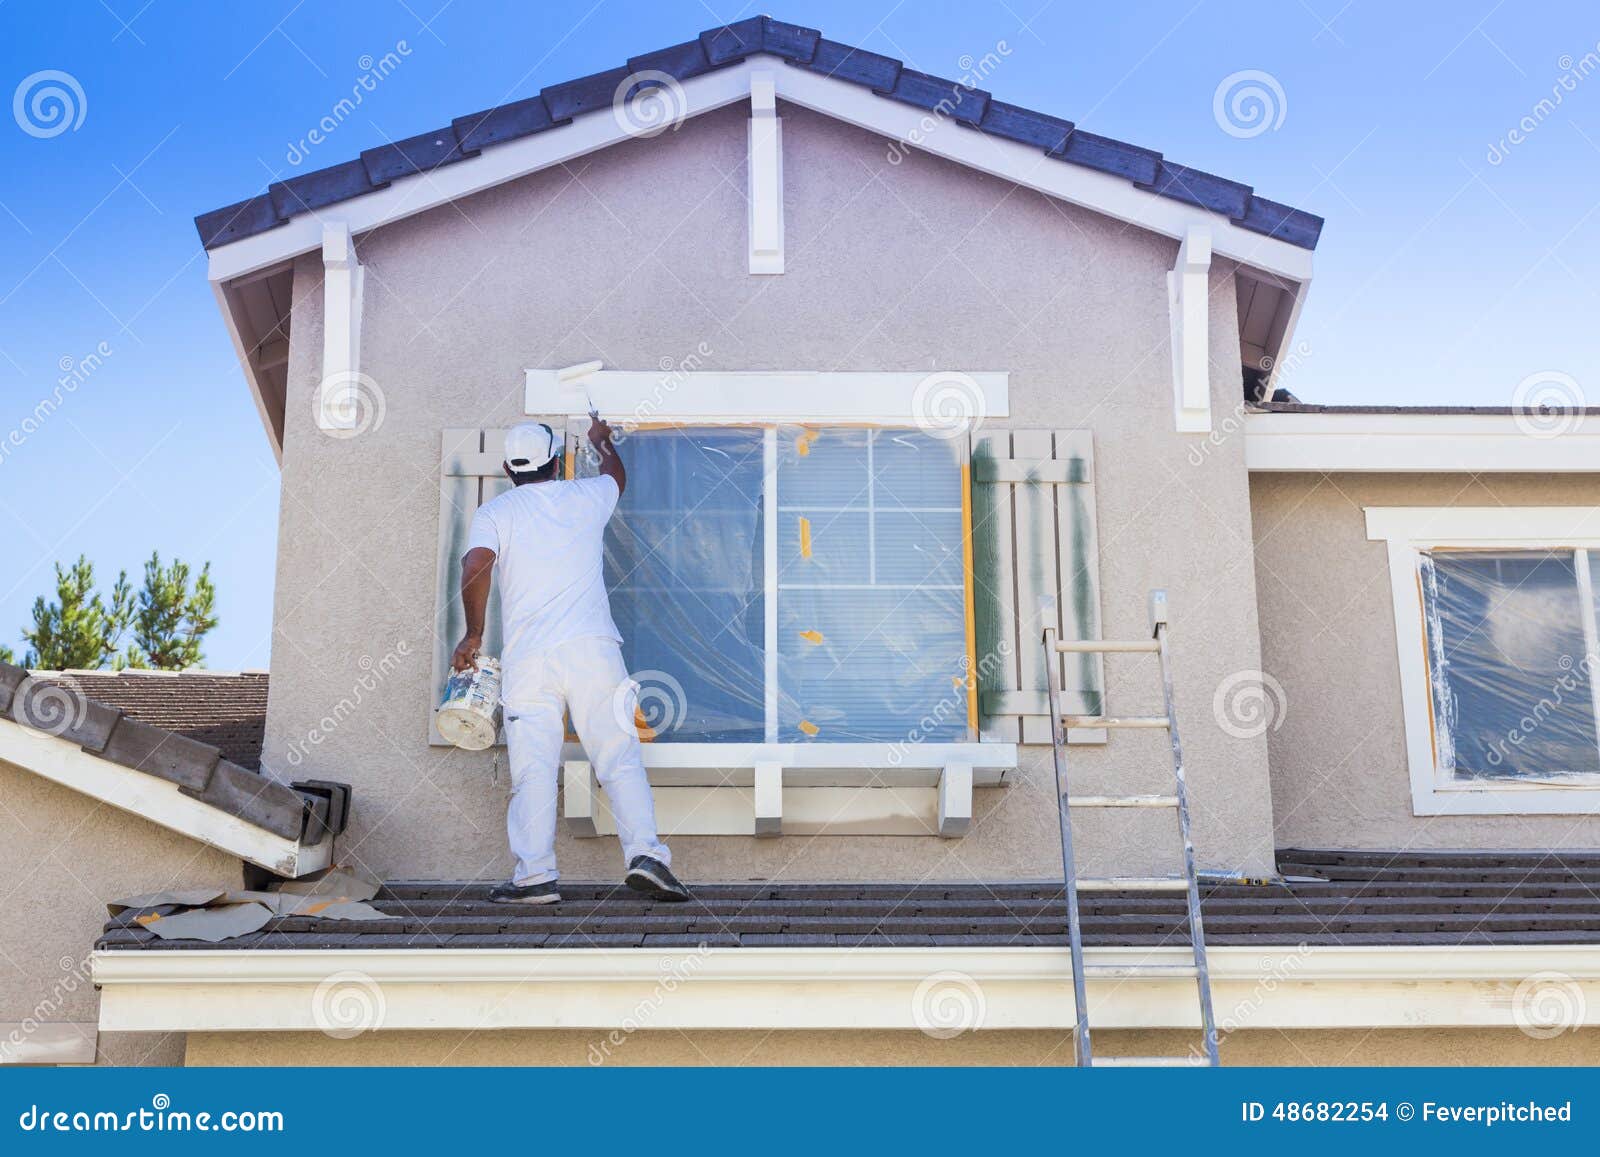 house painter painting the trim and shutters of home